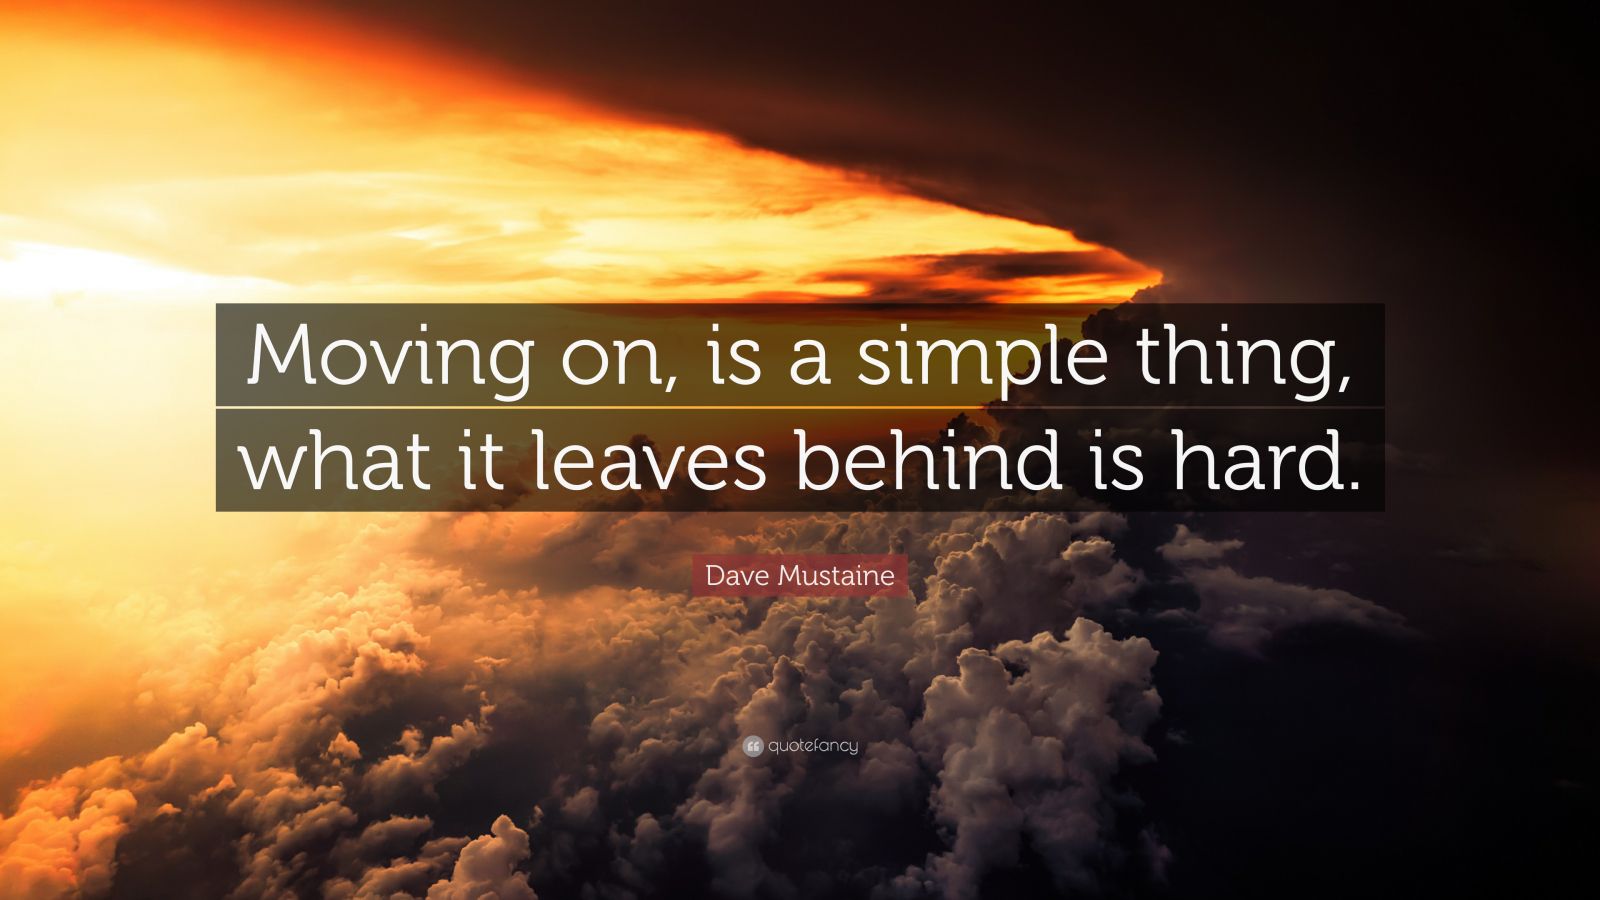 Dave Mustaine Quote: “Moving on, is a simple thing, what it leaves ...